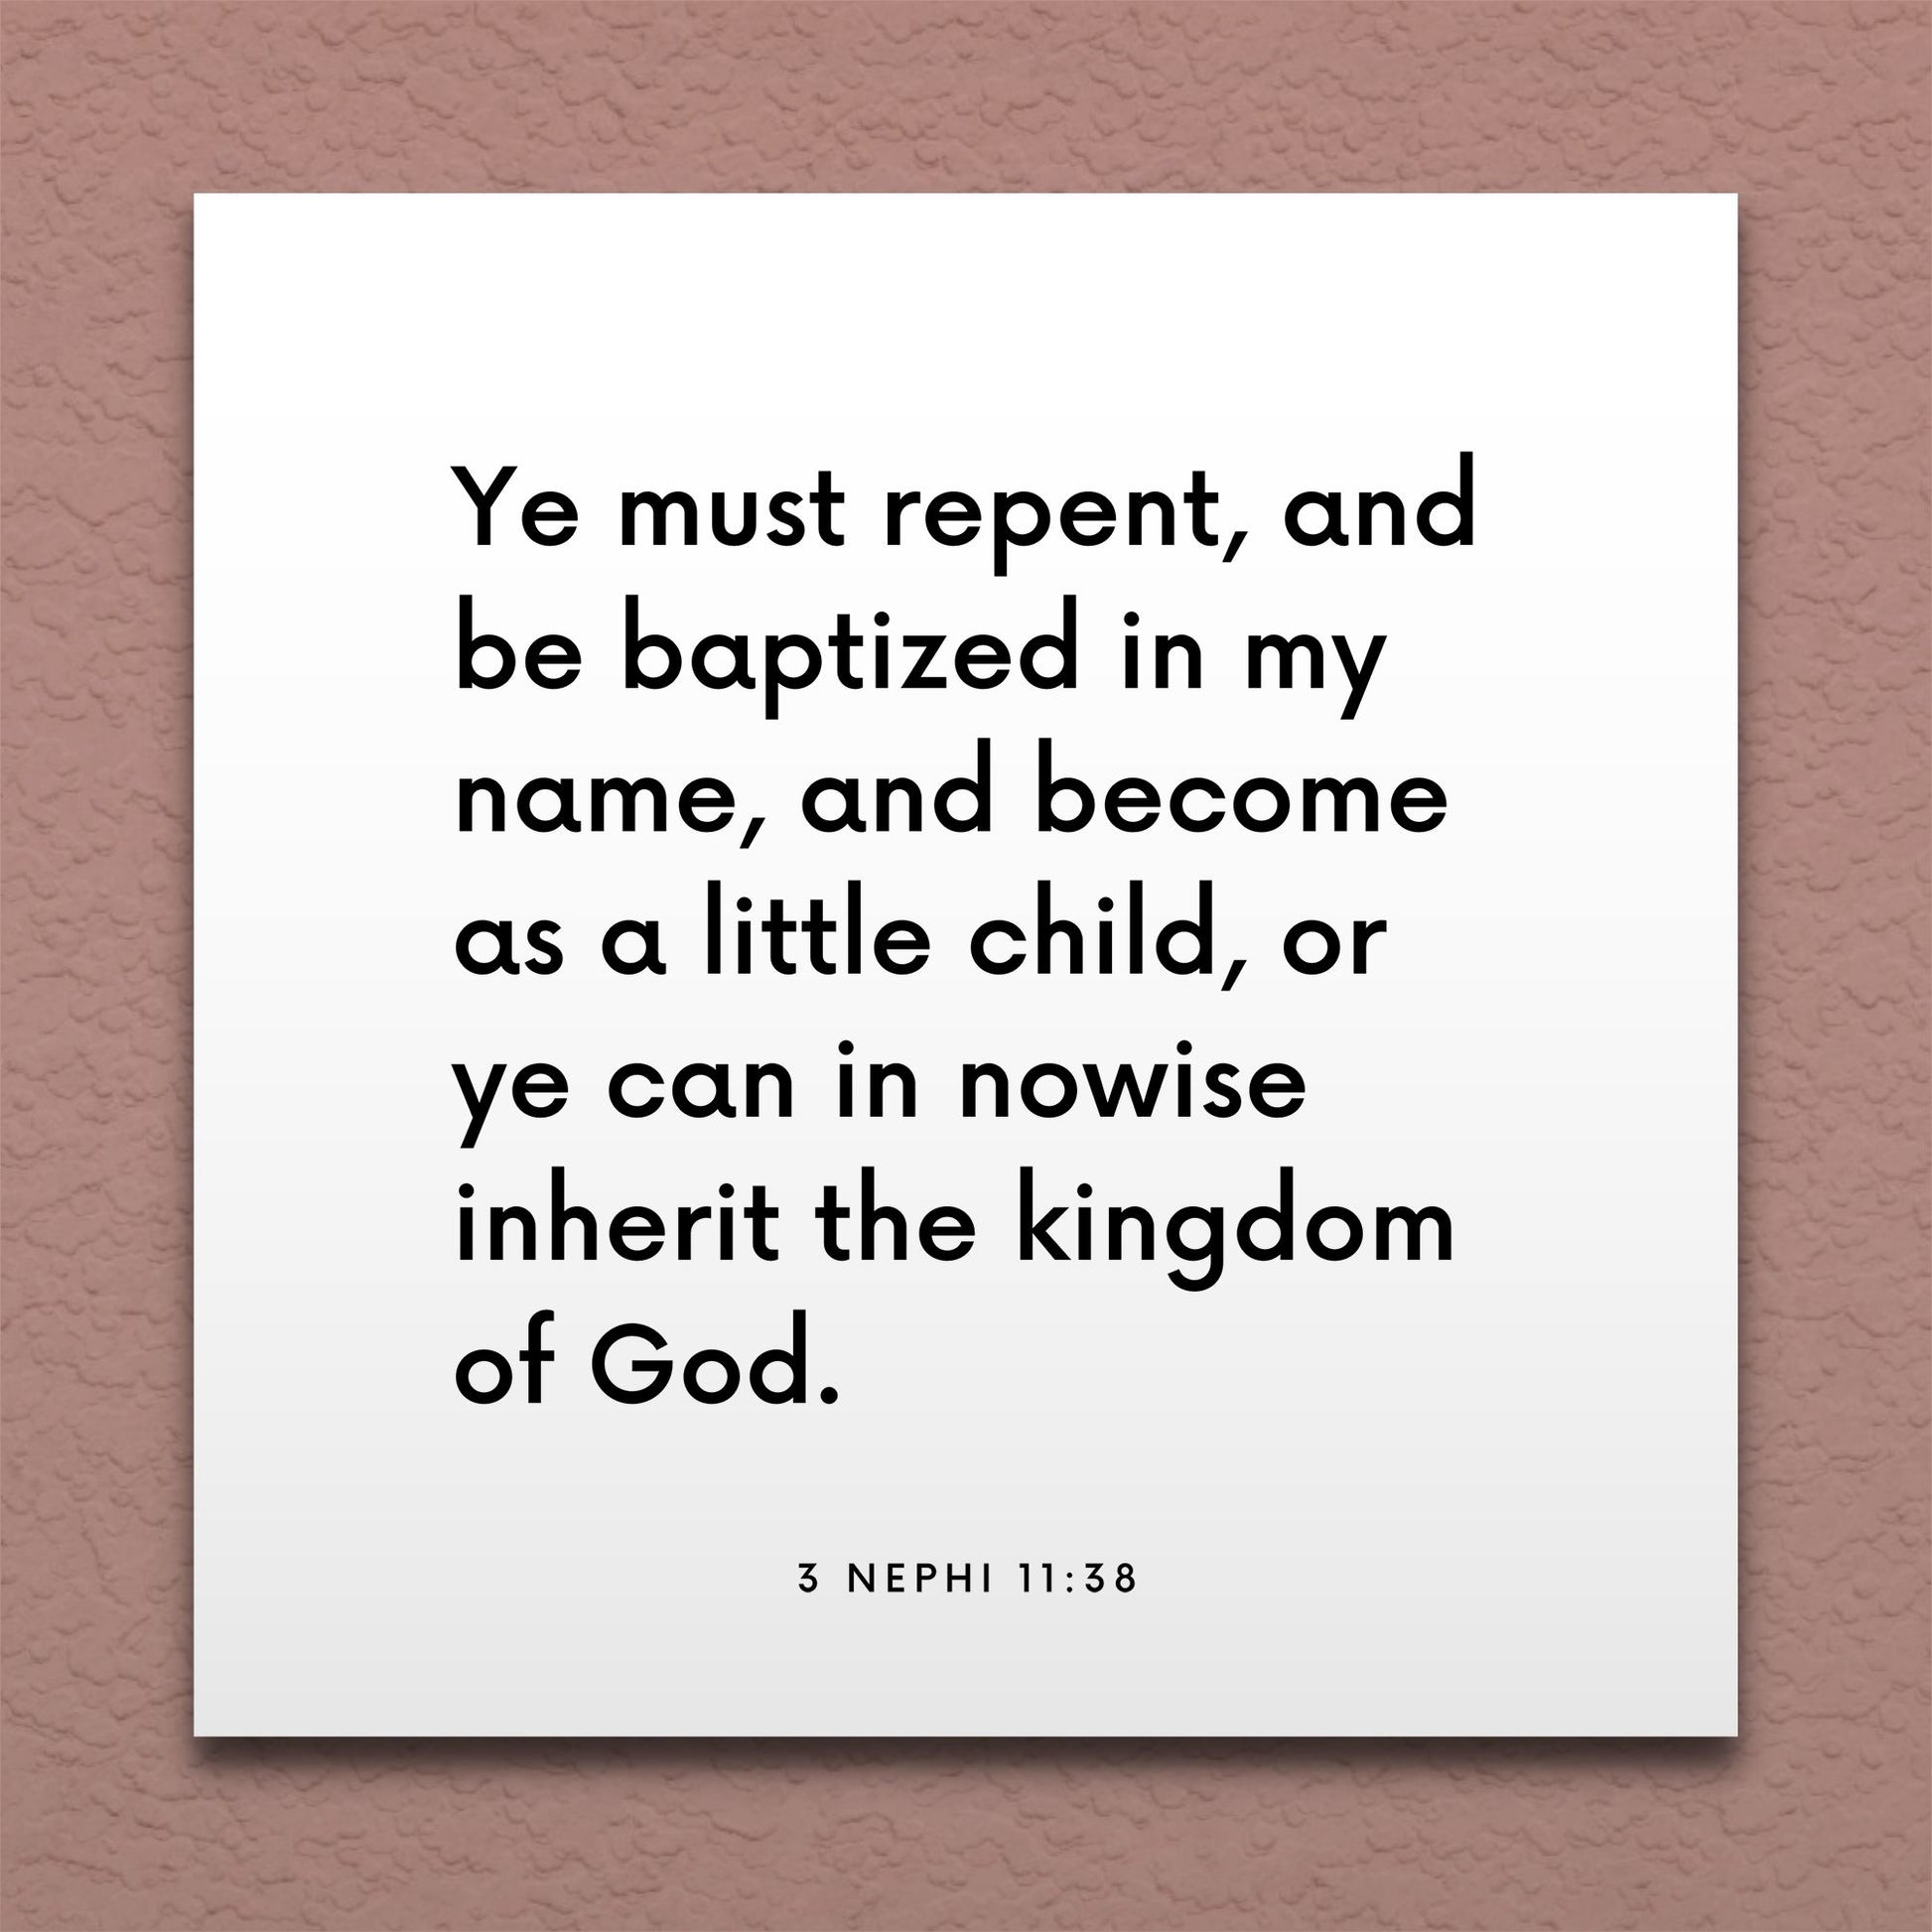 Wall-mounted scripture tile for 3 Nephi 11:38 - "Ye must repent, and be baptized in my name"